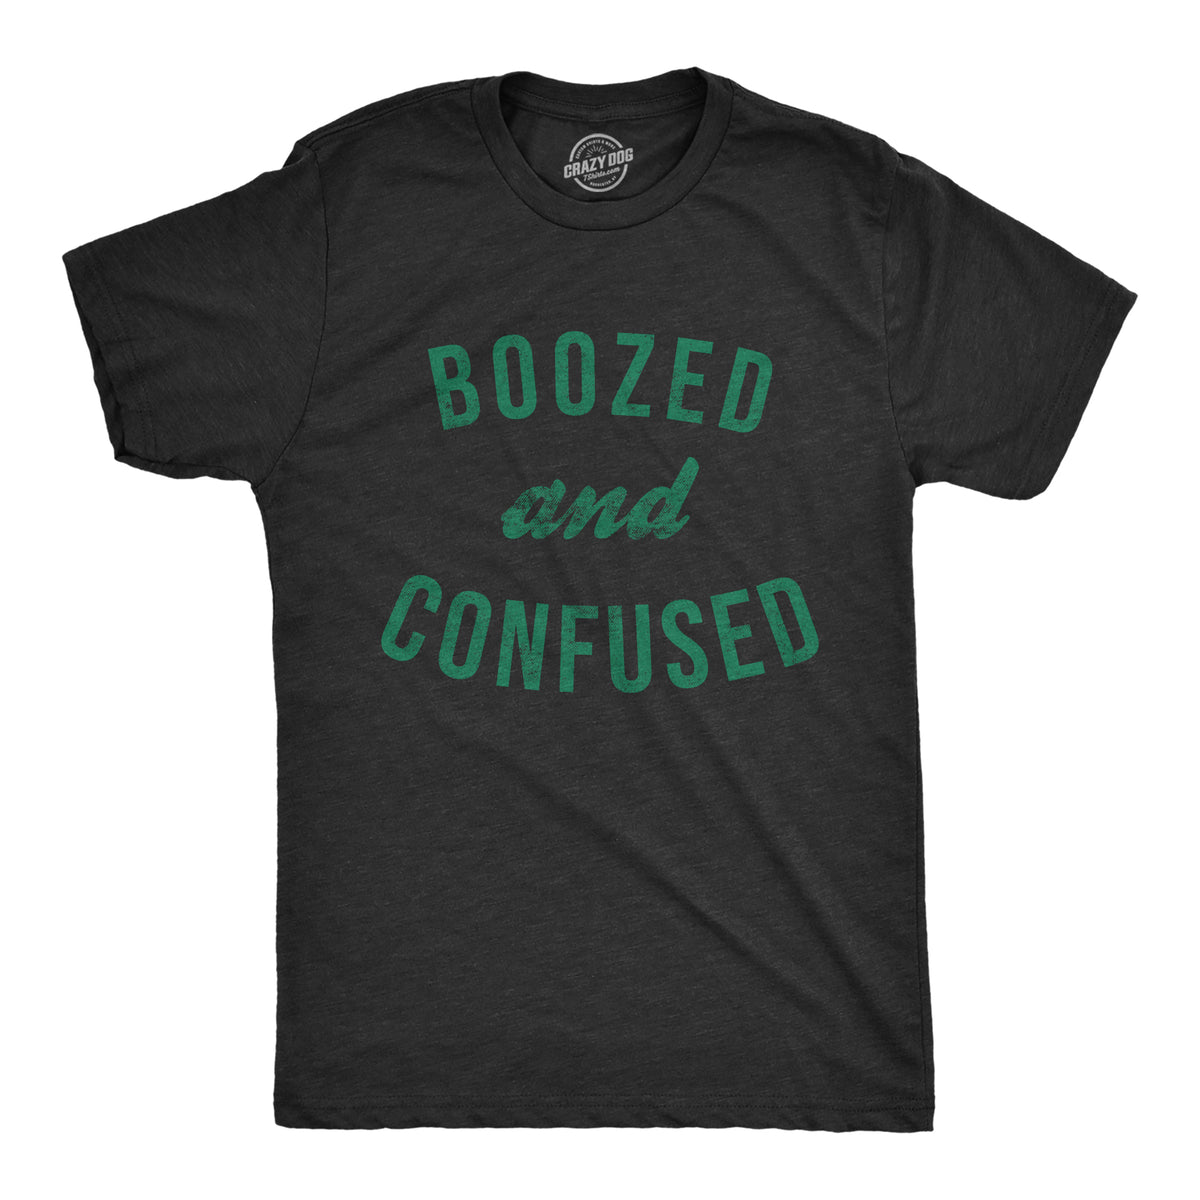 Funny Heather Black - Boozed Confused Boozed And Confused Mens T Shirt Nerdy Saint Patrick&#39;s Day Drinking Beer Tee